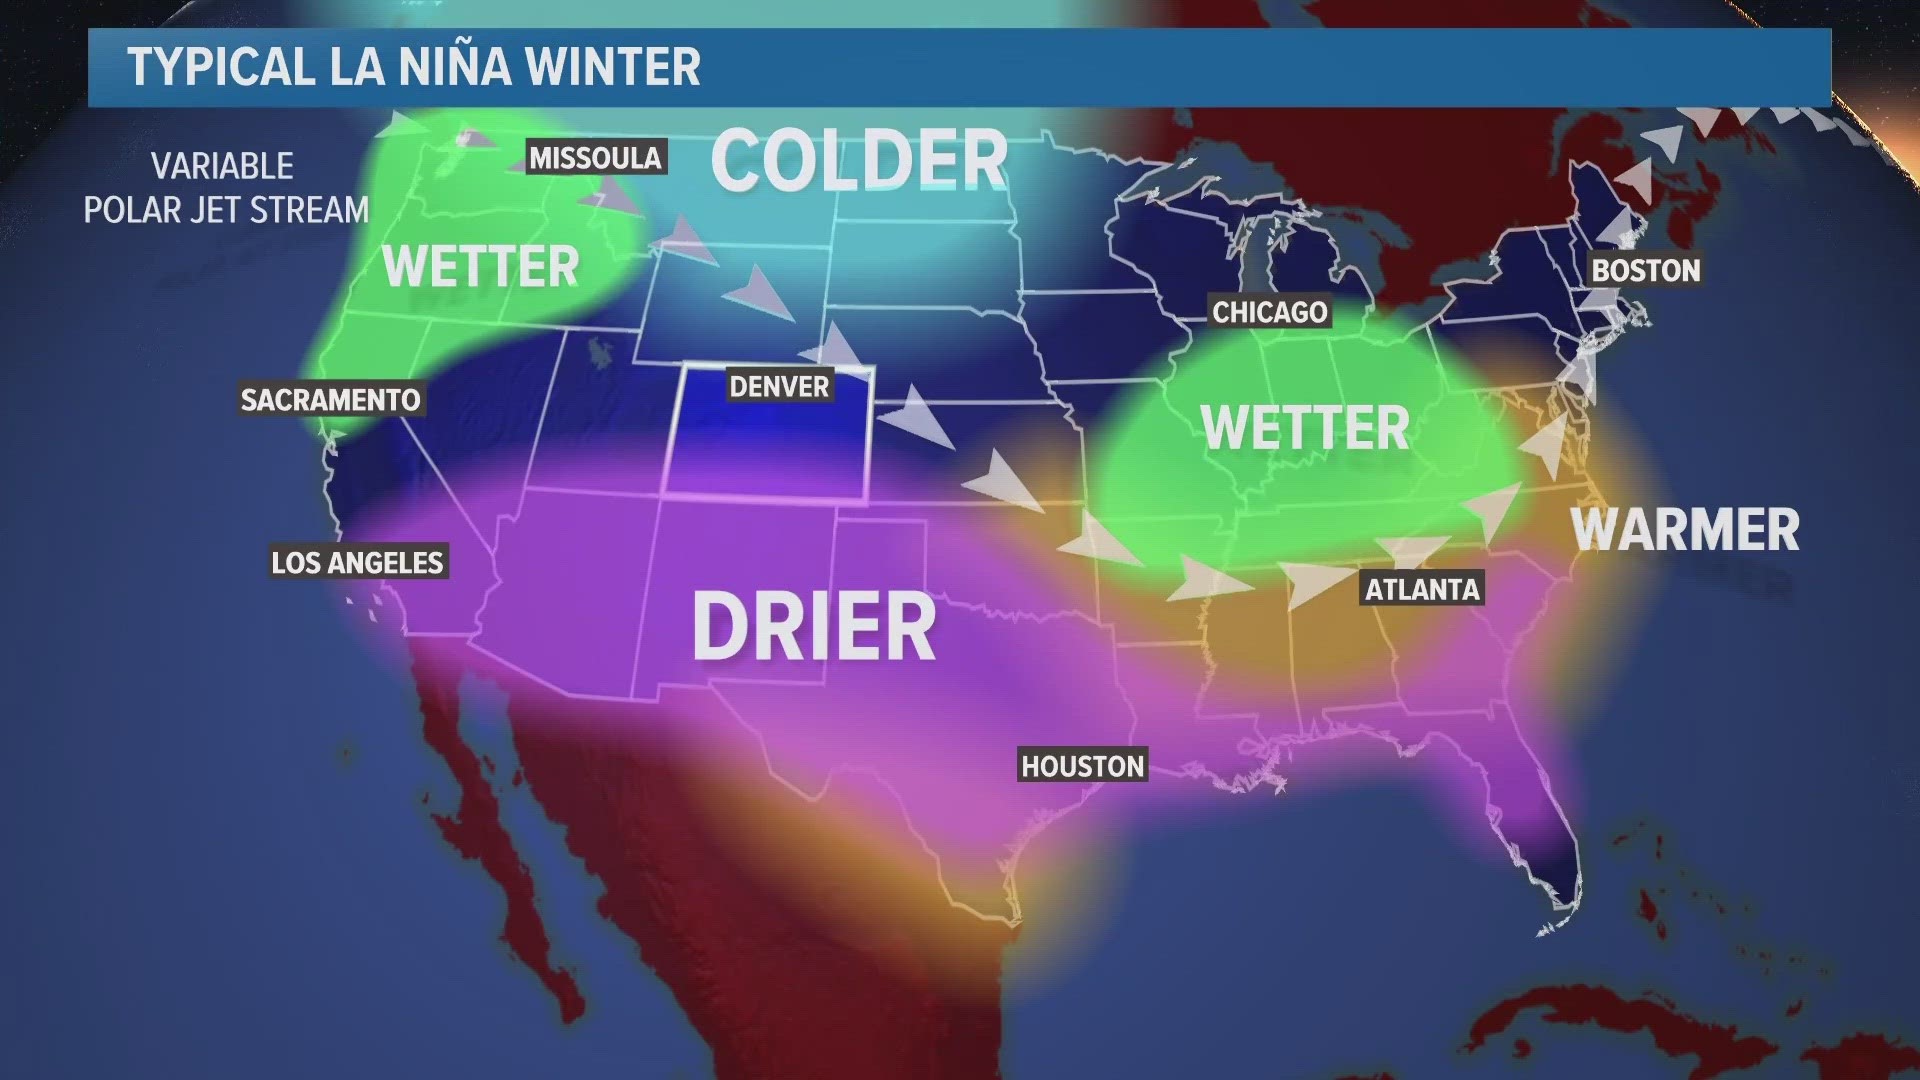 9NEWS Meteorologist Cory Reppenhagen takes a look at what La Nina's absence means for the spring forecast.